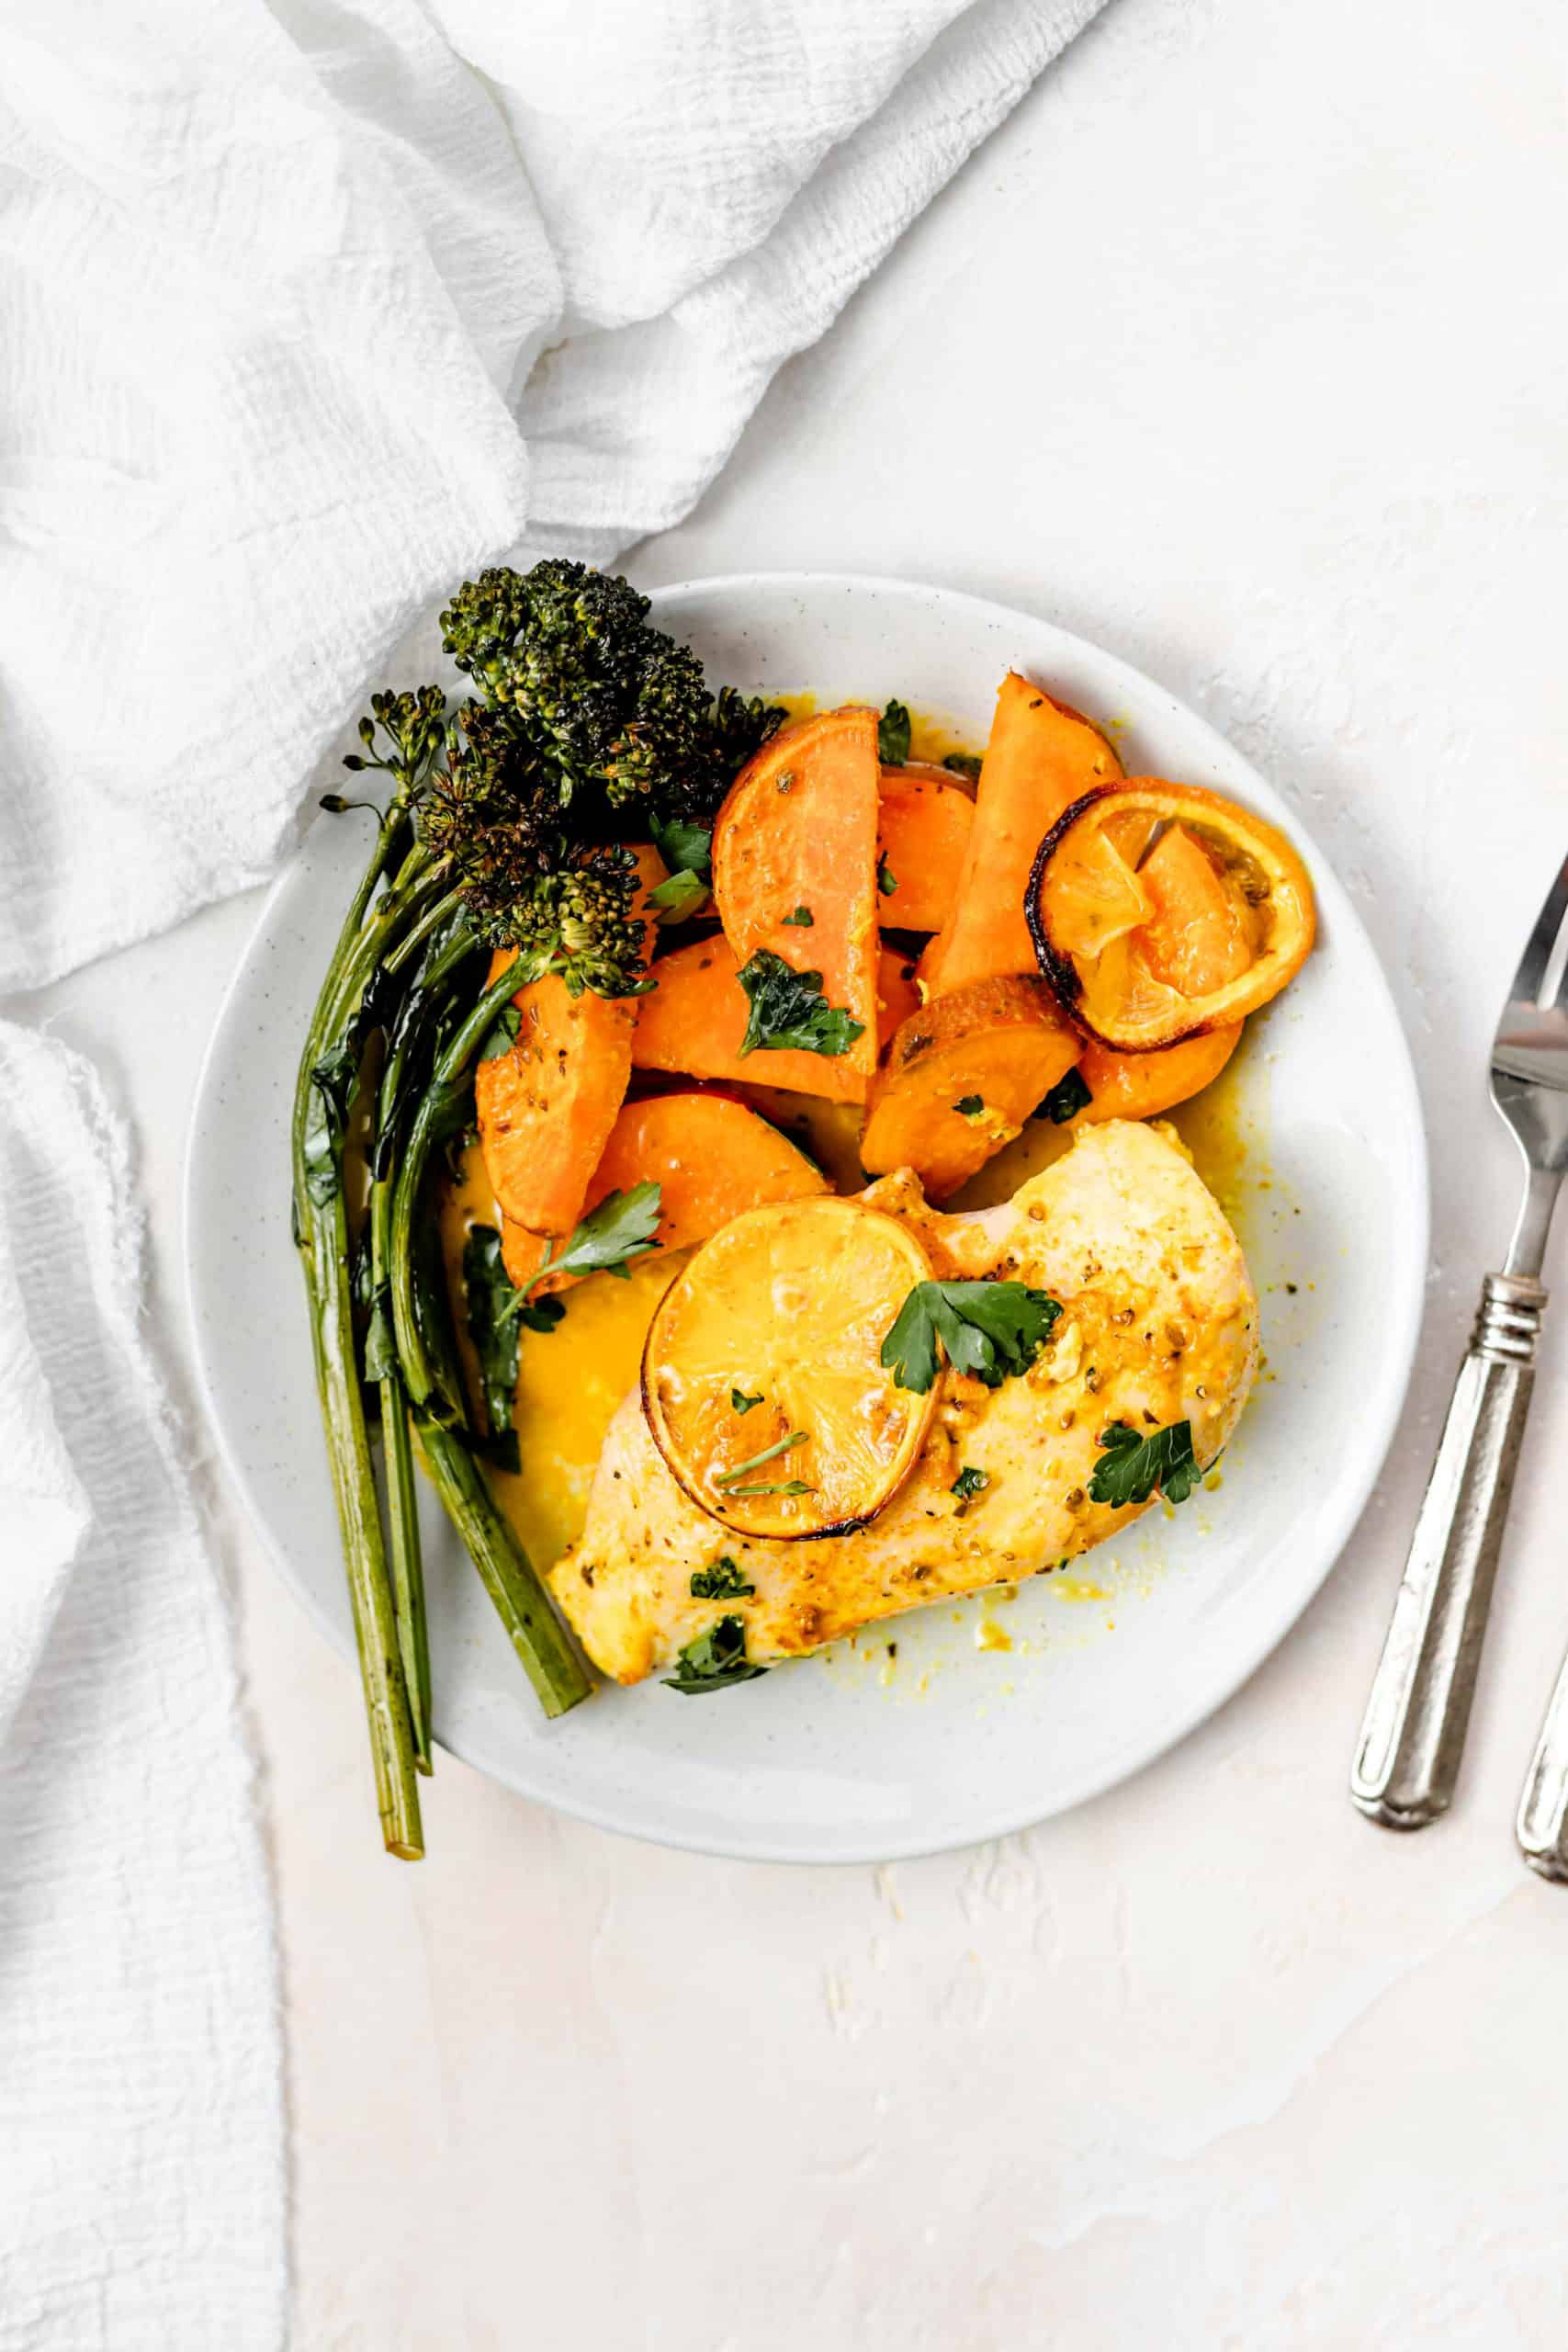 lemon chicken roasted sweet potatoes and broccolini in a plate